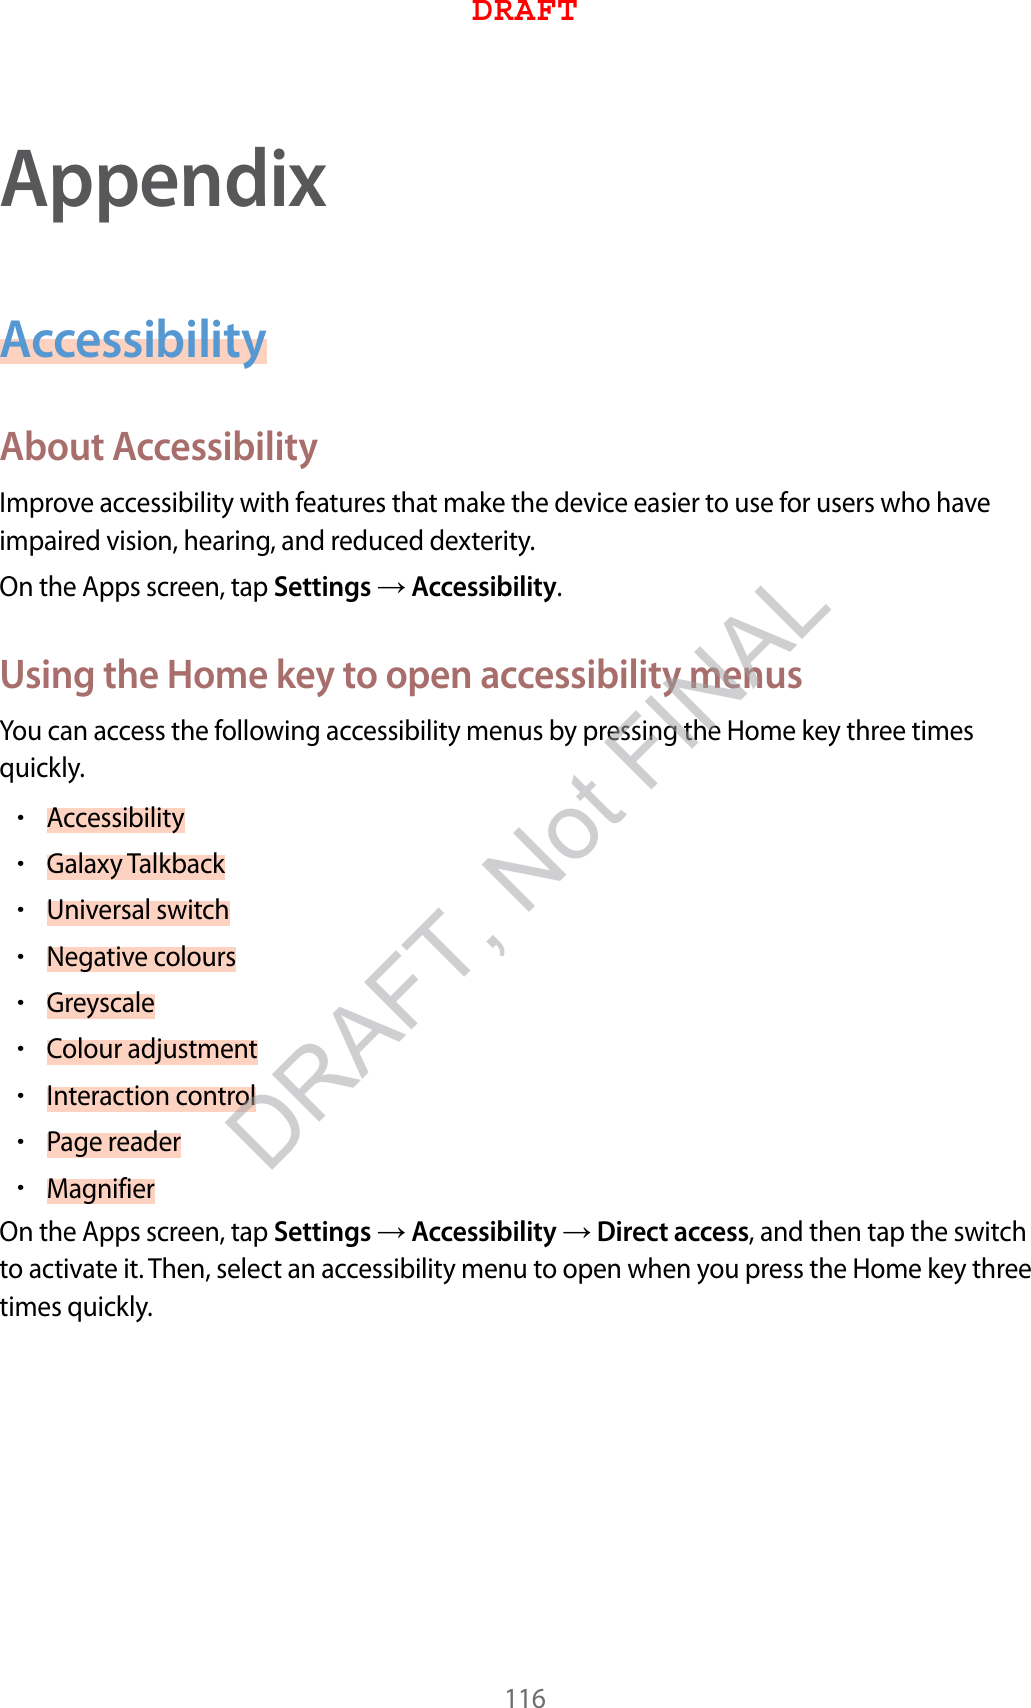 116AppendixAccessibilityAbout AccessibilityImprove accessibility with features that make the device easier to use for users who have impaired vision, hearing, and reduced dexterity.On the Apps screen, tap Settings  Accessibility.Using the Home key to open accessibility menusYou can access the following accessibility menus by pressing the Home key three times quickly.•Accessibility•Galaxy Talkback•Universal switch•Negative colours•Greyscale•Colour adjustment•Interaction control•Page reader•MagnifierOn the Apps screen, tap Settings  Accessibility  Direct access, and then tap the switch to activate it. Then, select an accessibility menu to open when you press the Home key three times quickly.DRAFTDRAFT, Not FINAL